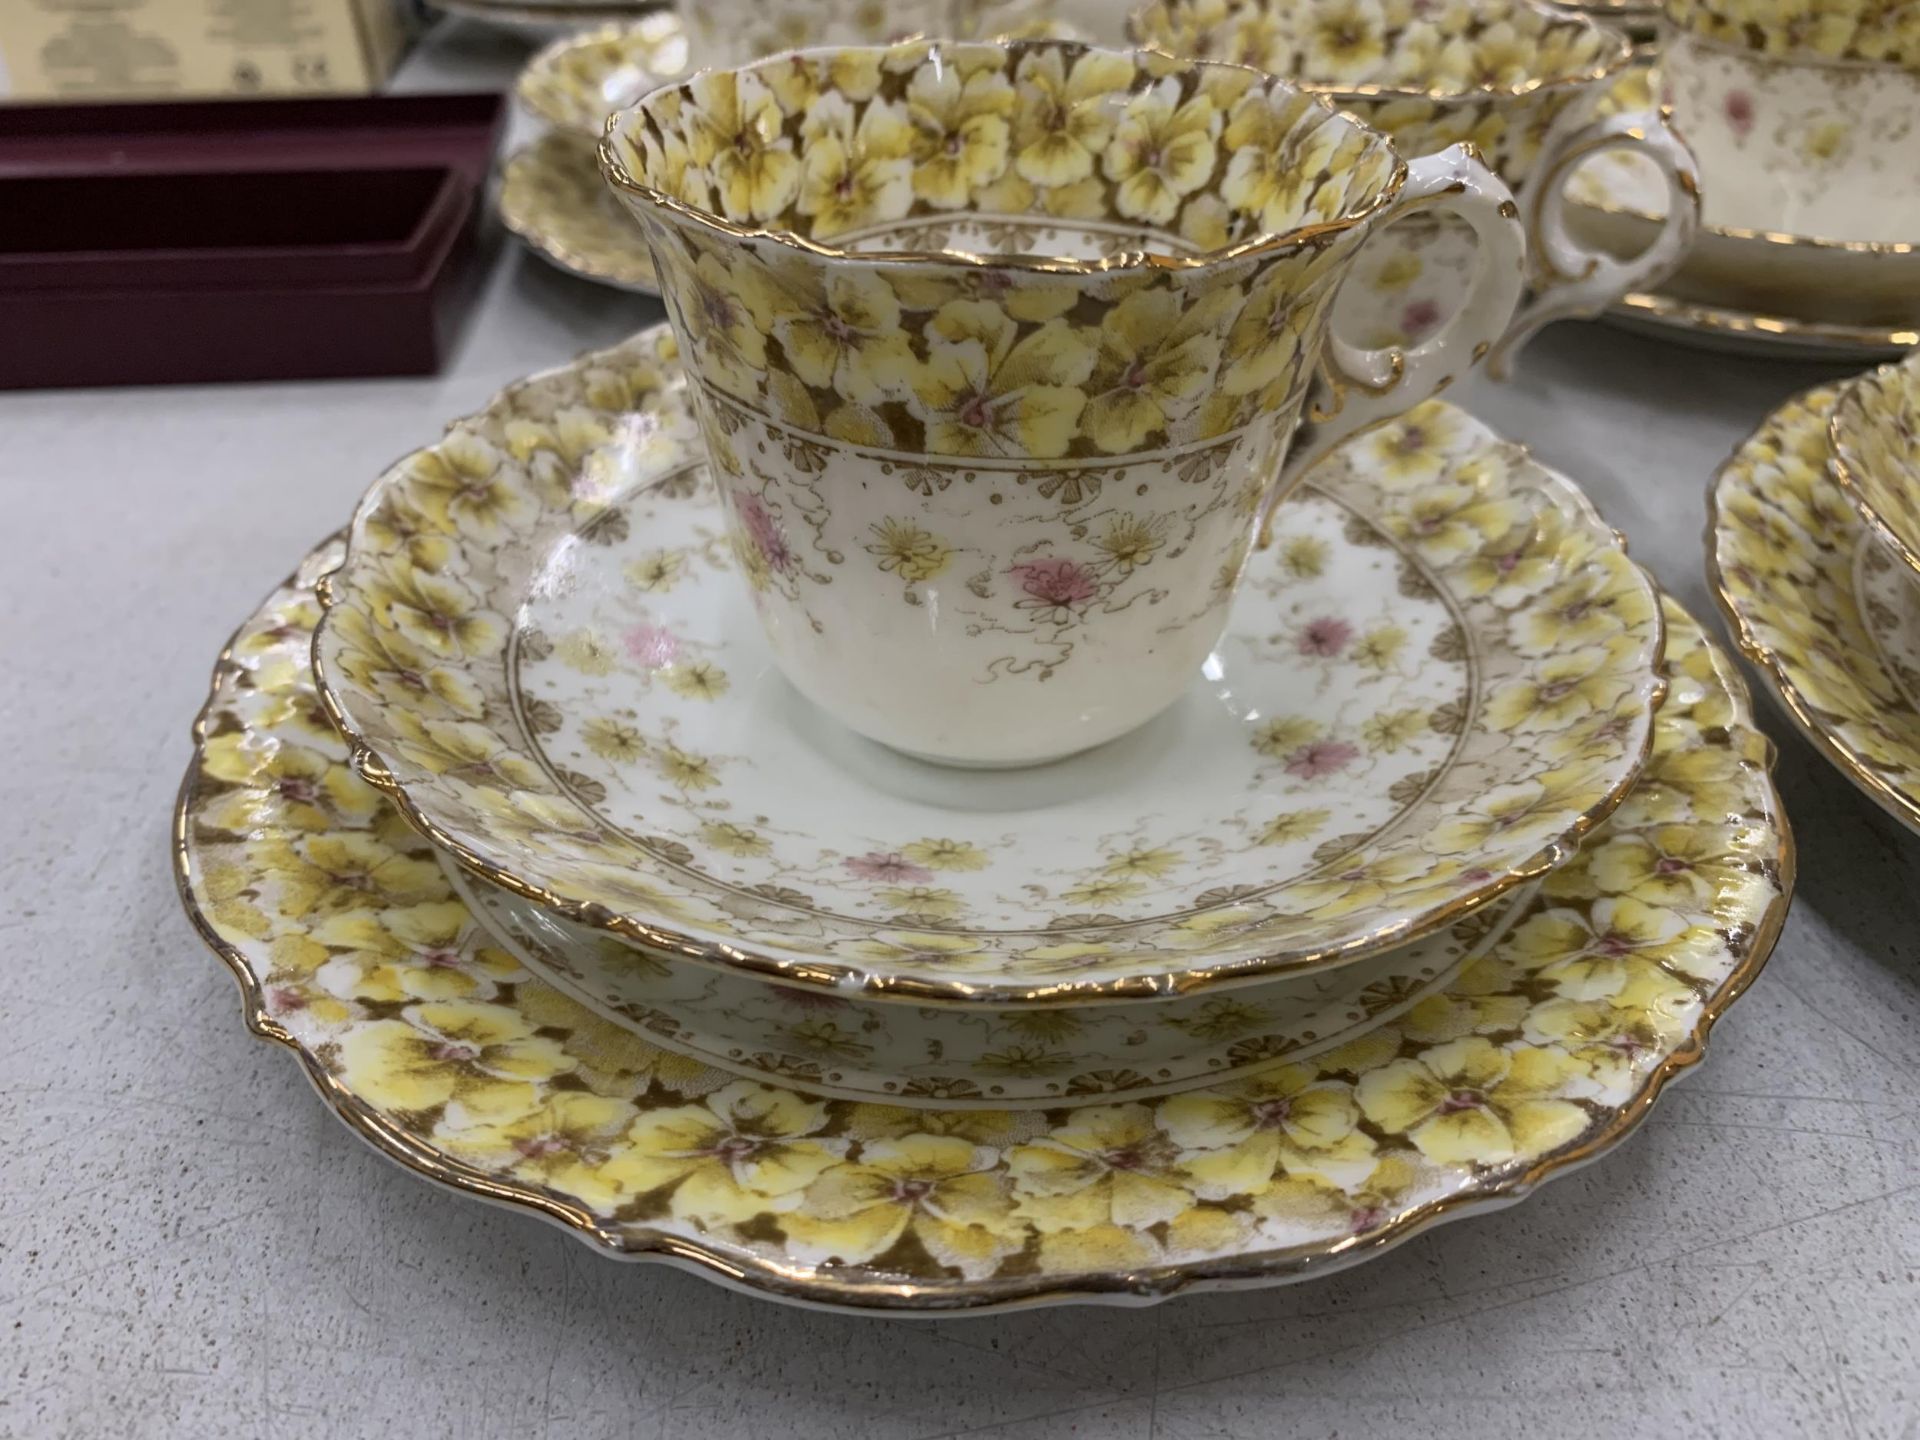 A VINTAGE CHAPMAN CHINA TEASET TO INCLUDE CUPS, SAUCERS, SIDE PLATES, CAKE PLATES A CREAM JUG AND - Image 2 of 4